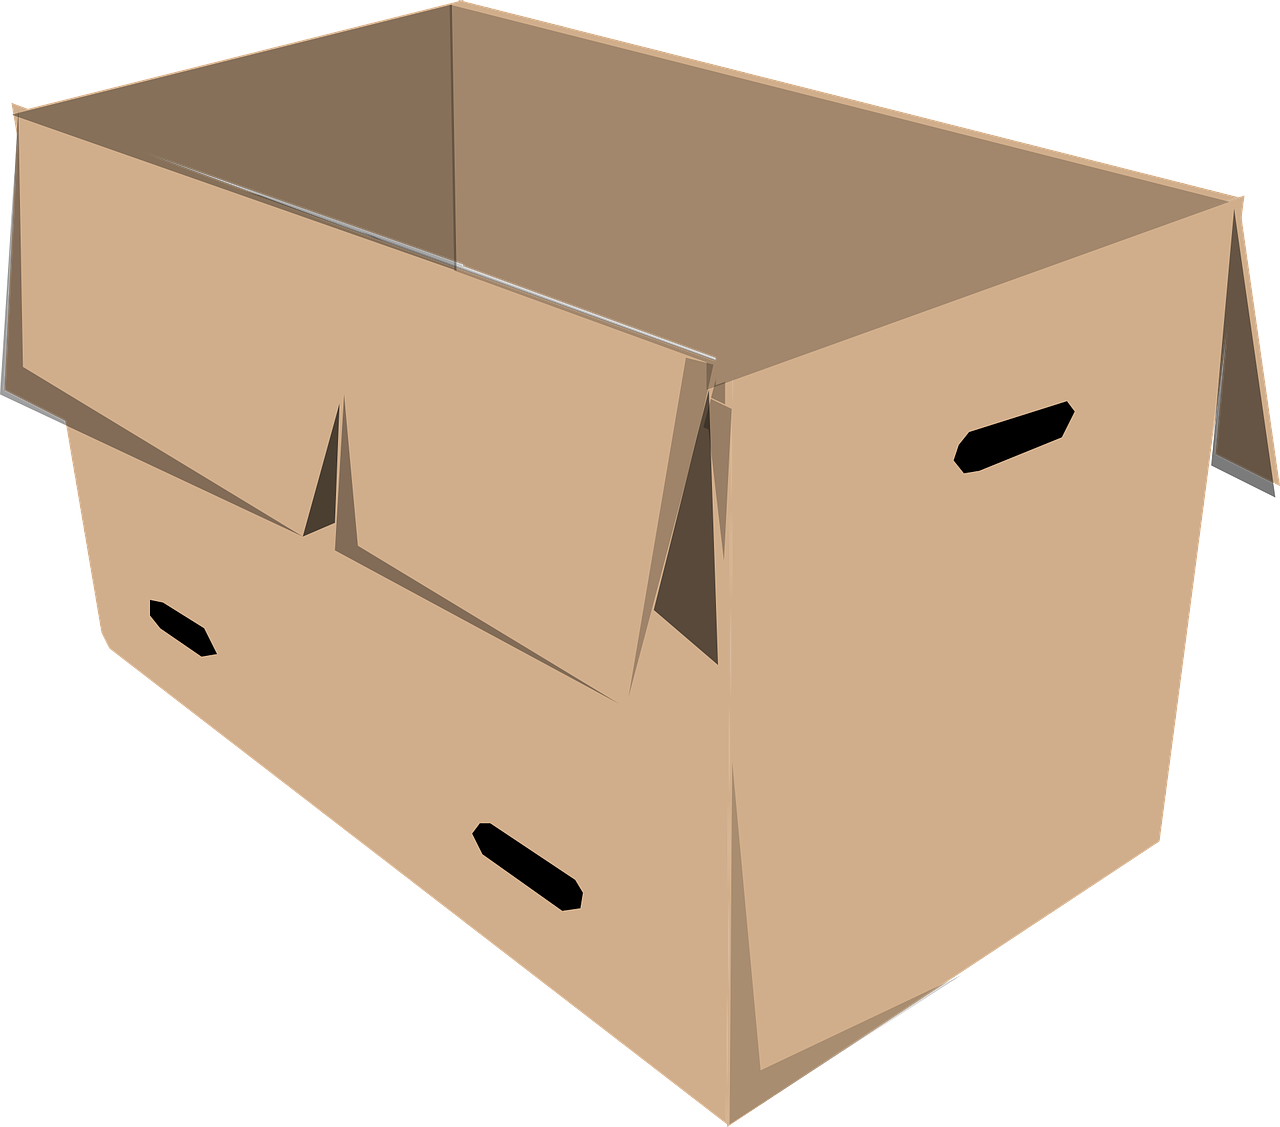 a cardboard box on a black background, concept art, by Tom Carapic, pixabay, mingei, modern simplified vector art, furniture overturned, stew, archive material